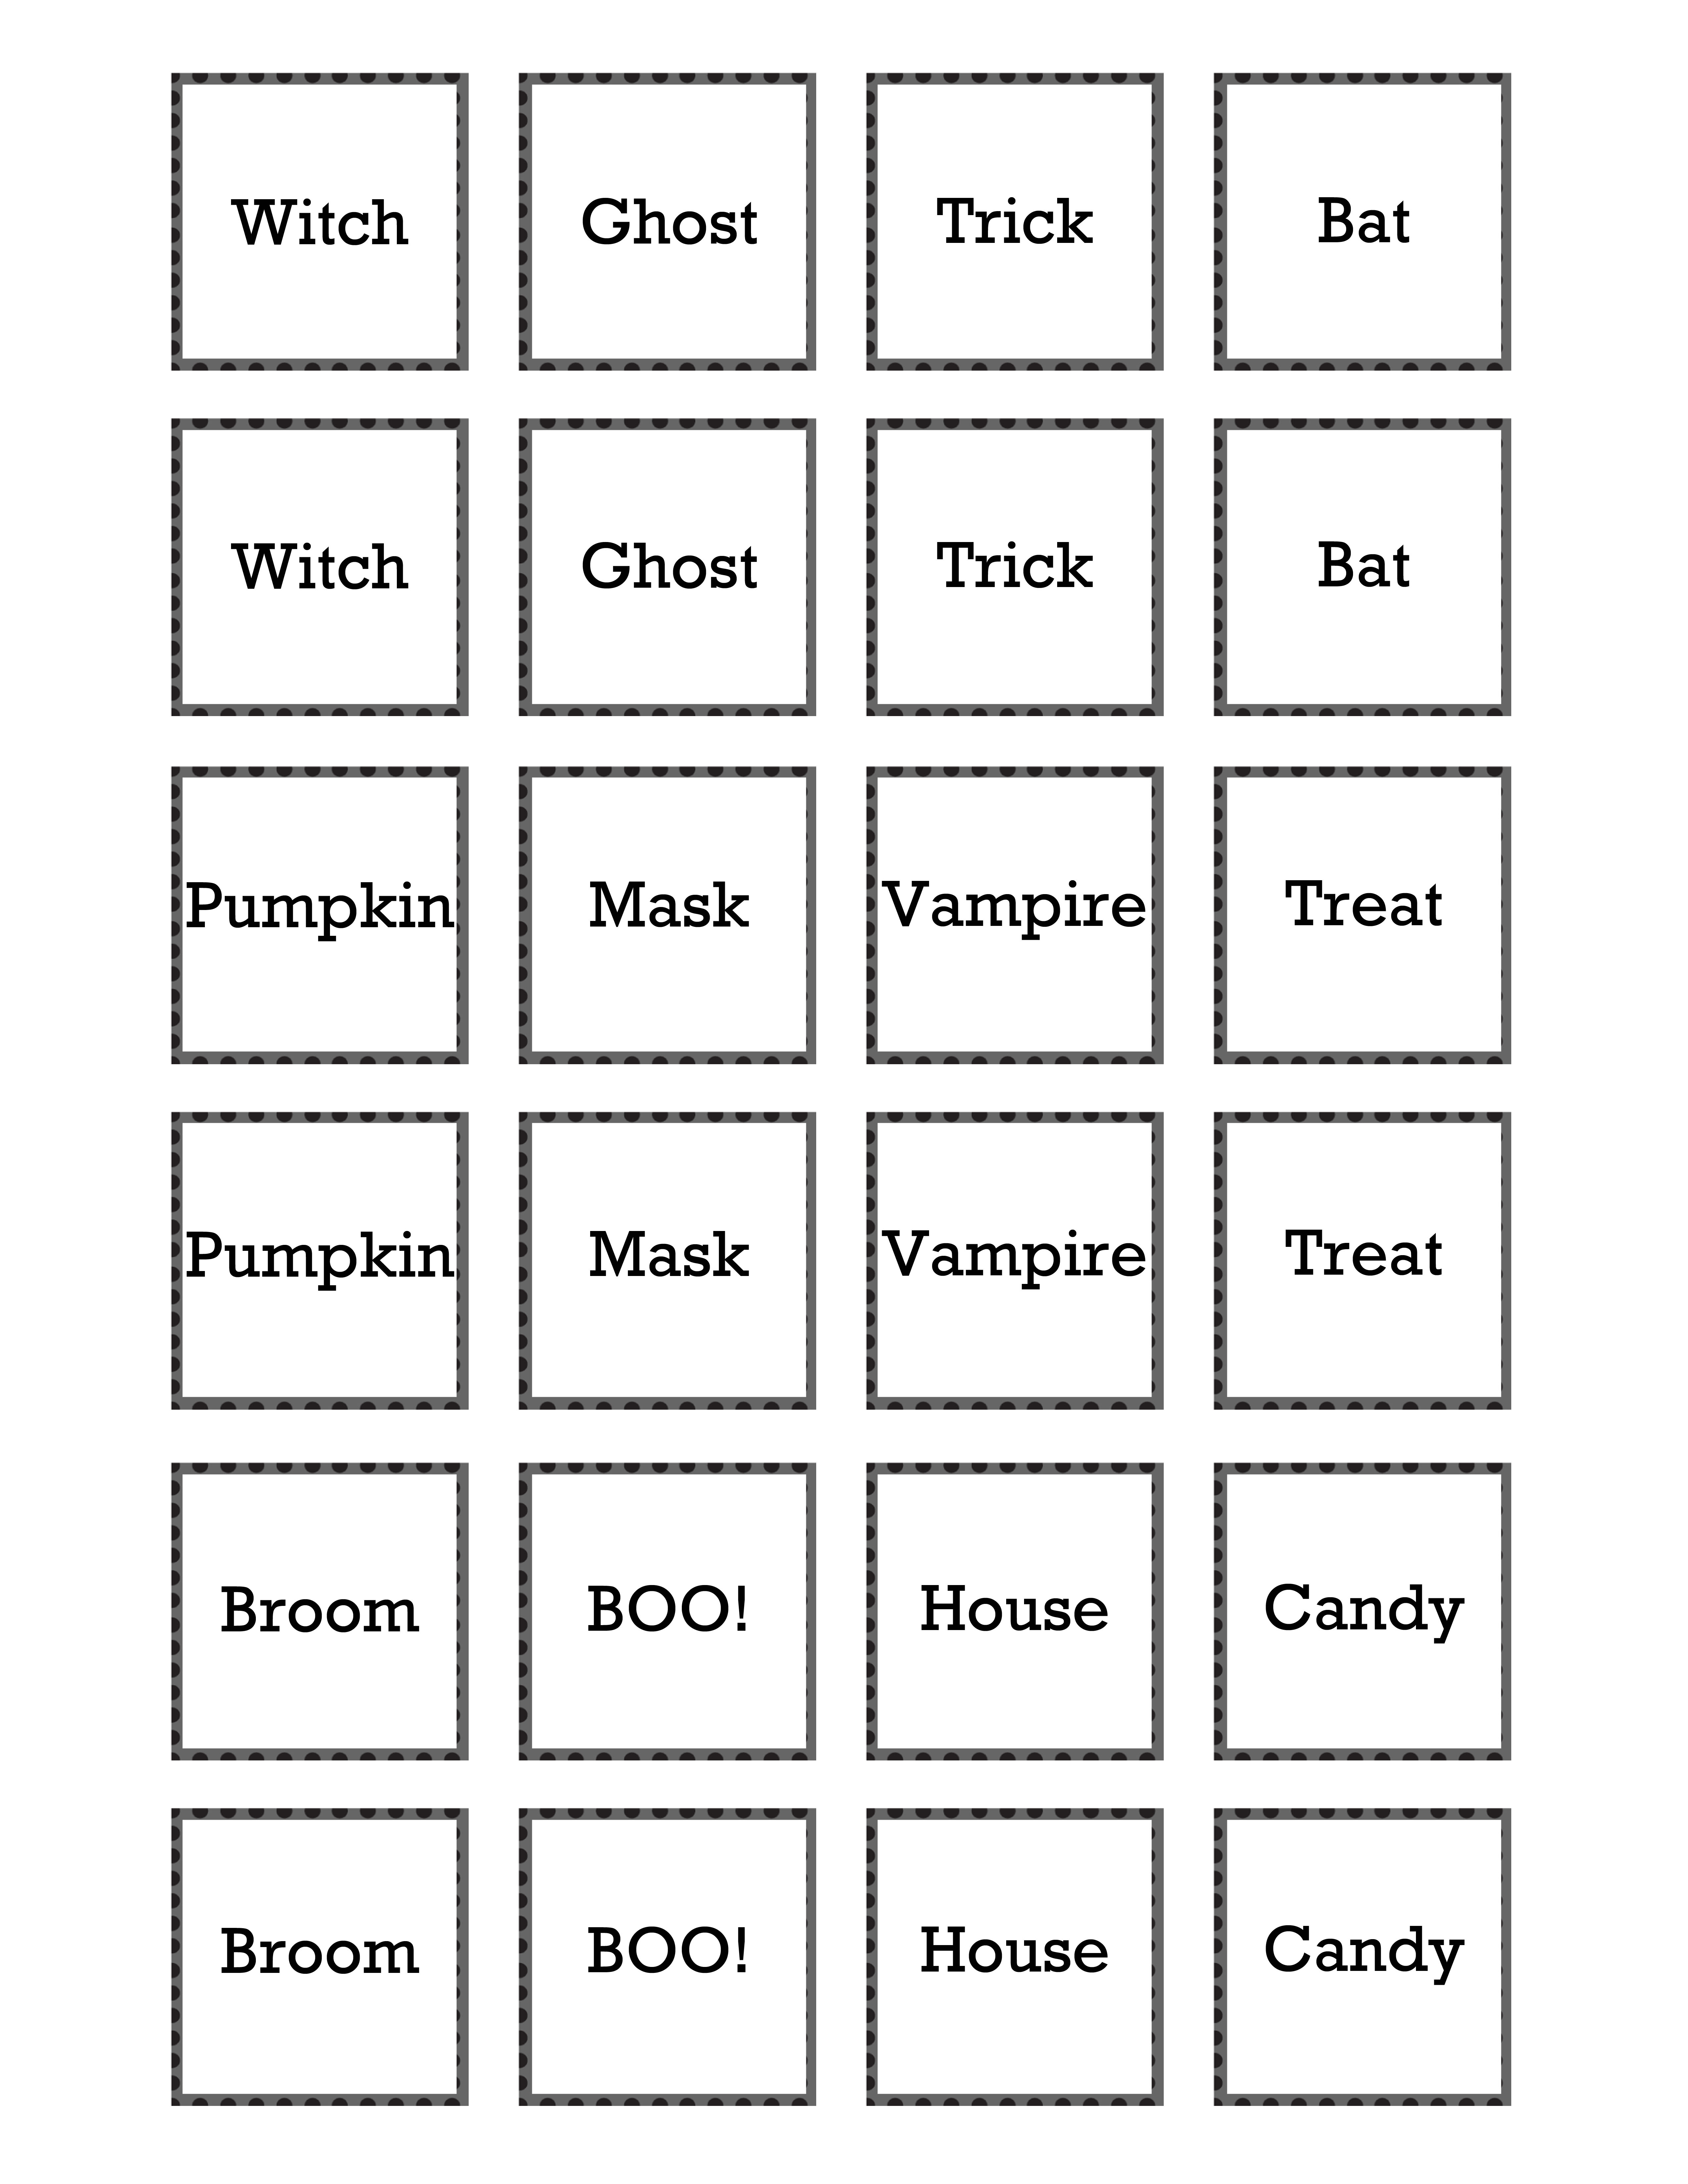 picture-memory-games-printable-game-on-land